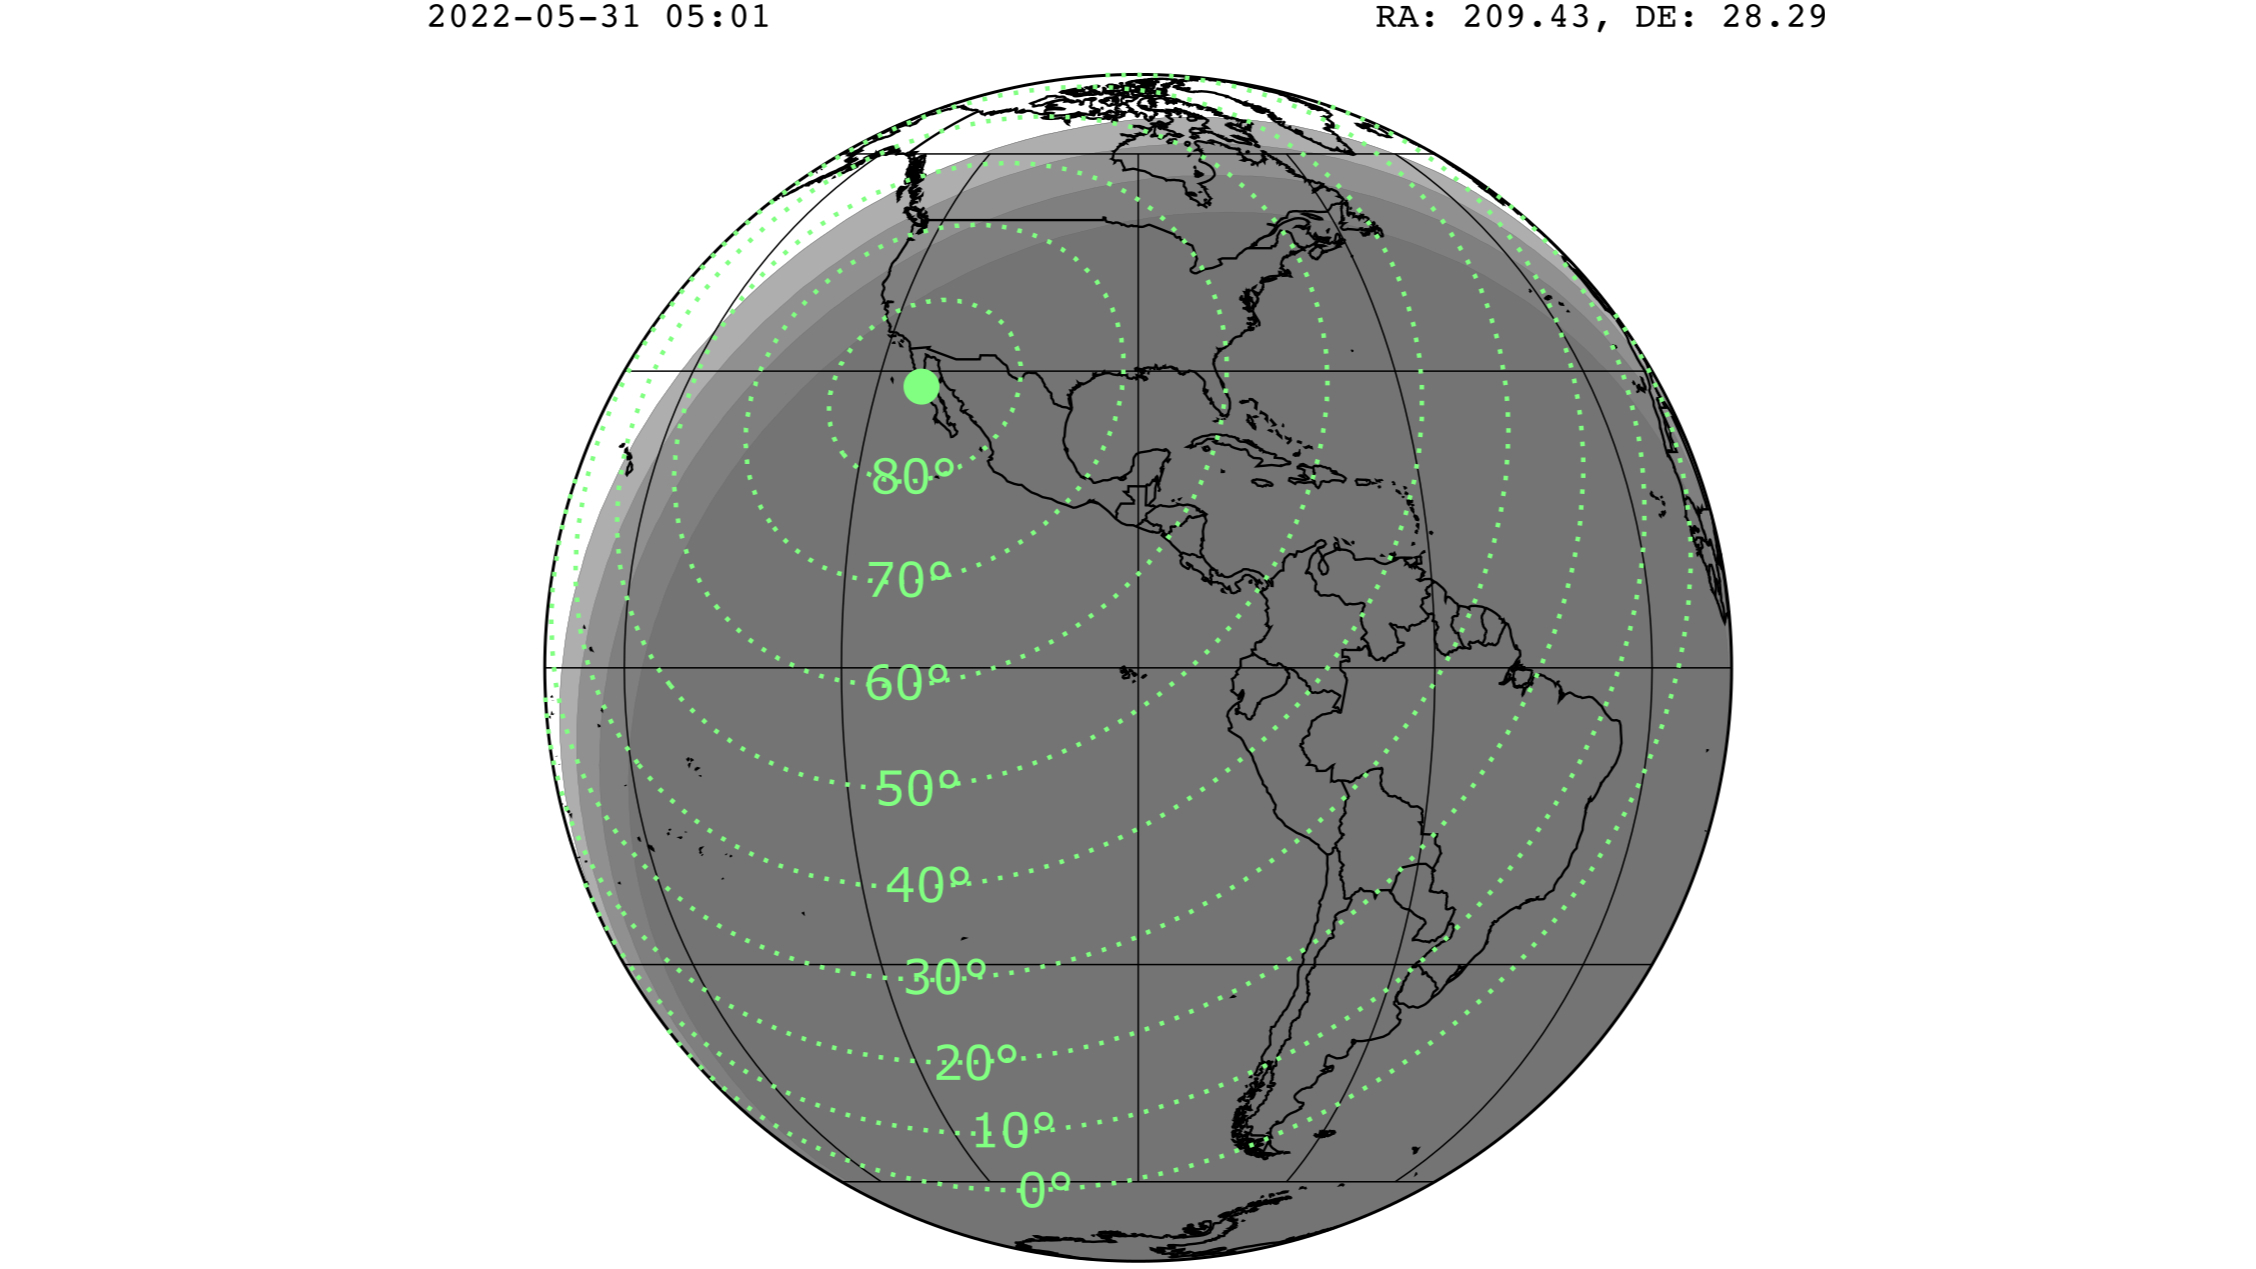 A map showing the visibility of the possible tau Herculid meteor shower.